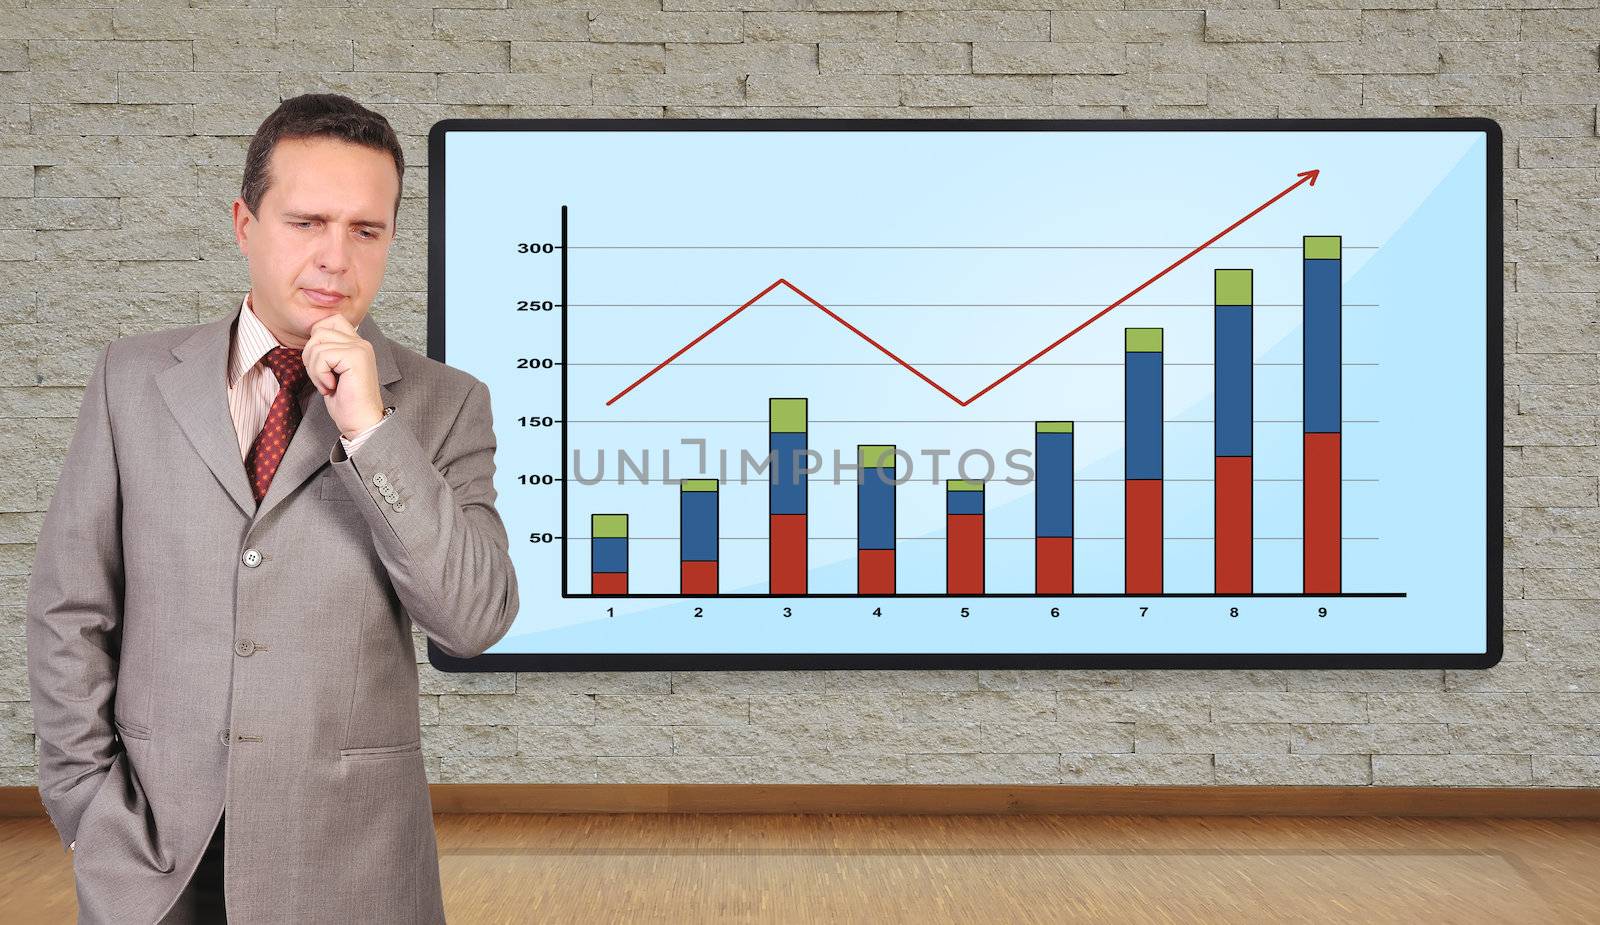 businessman thinking and plasma with chart on wall